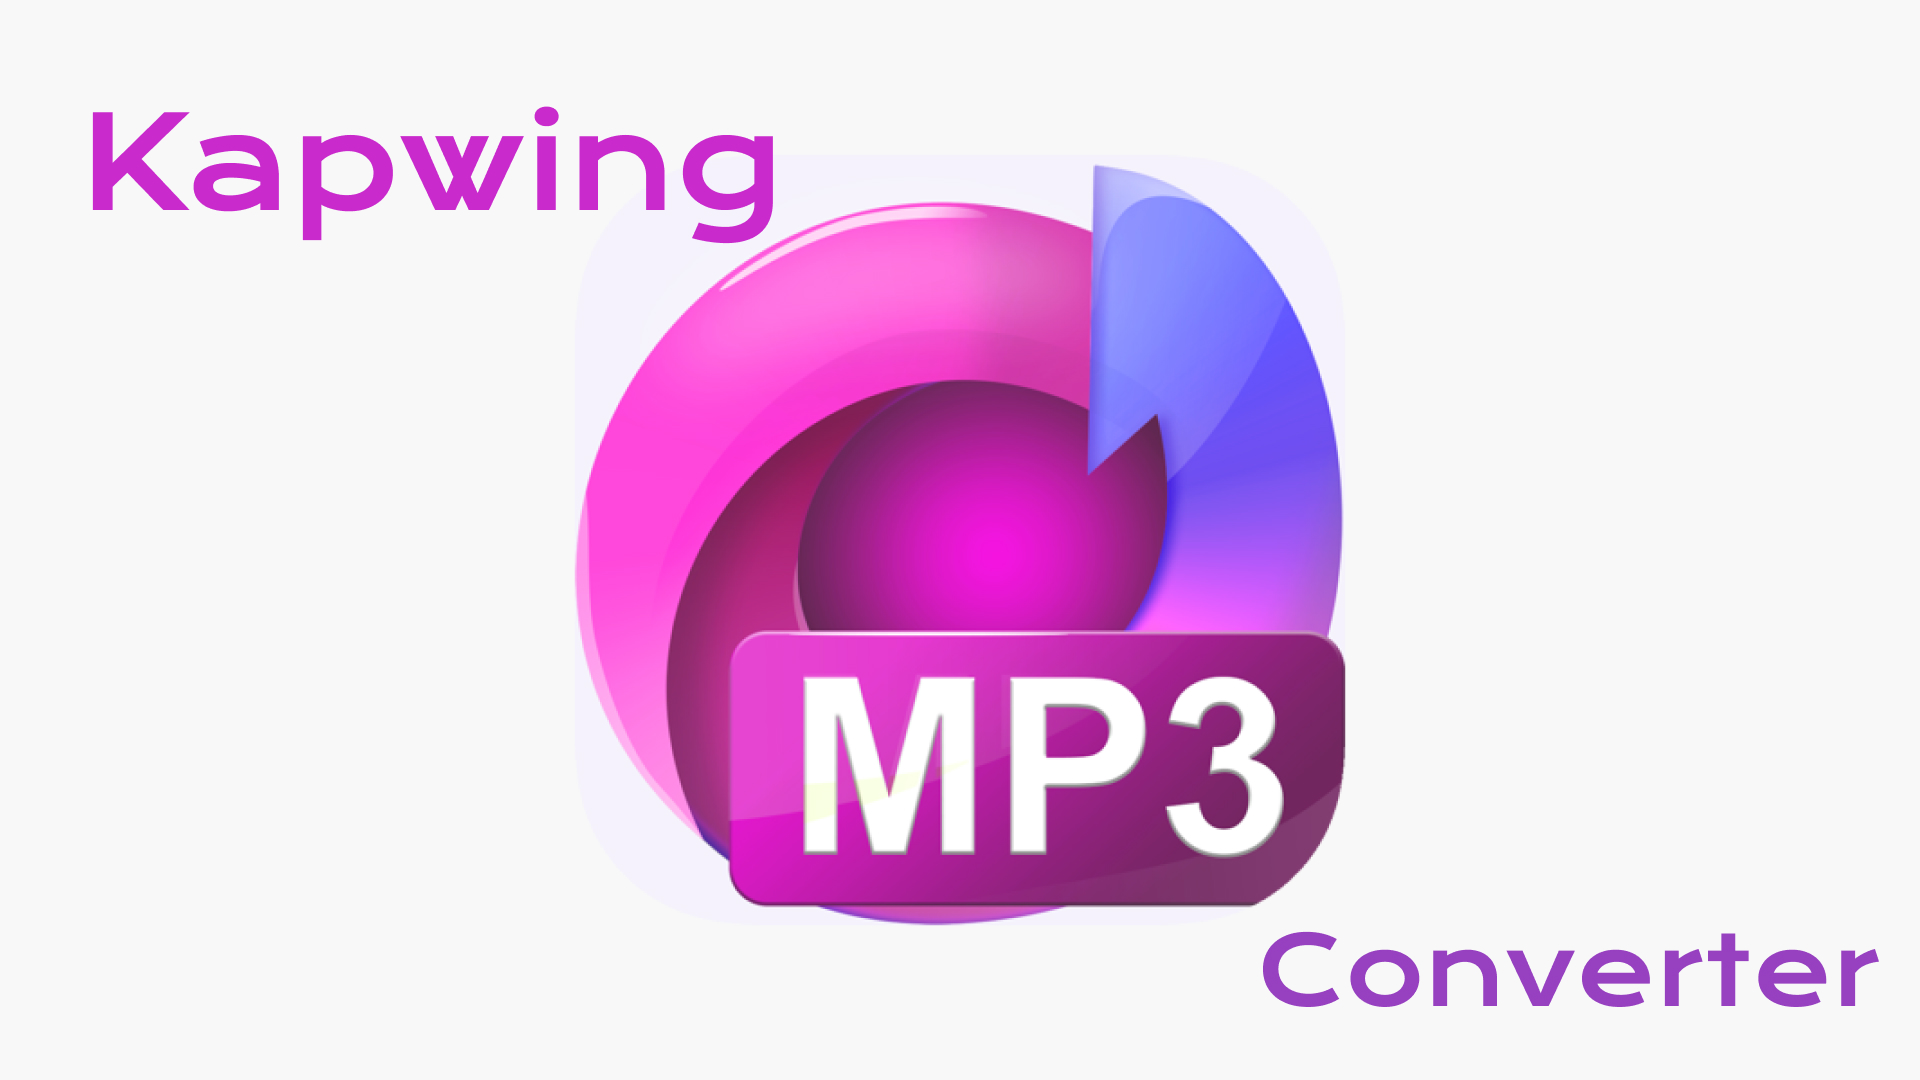 [Detailed Guide] How to Use Kapwing MP3 Converter?